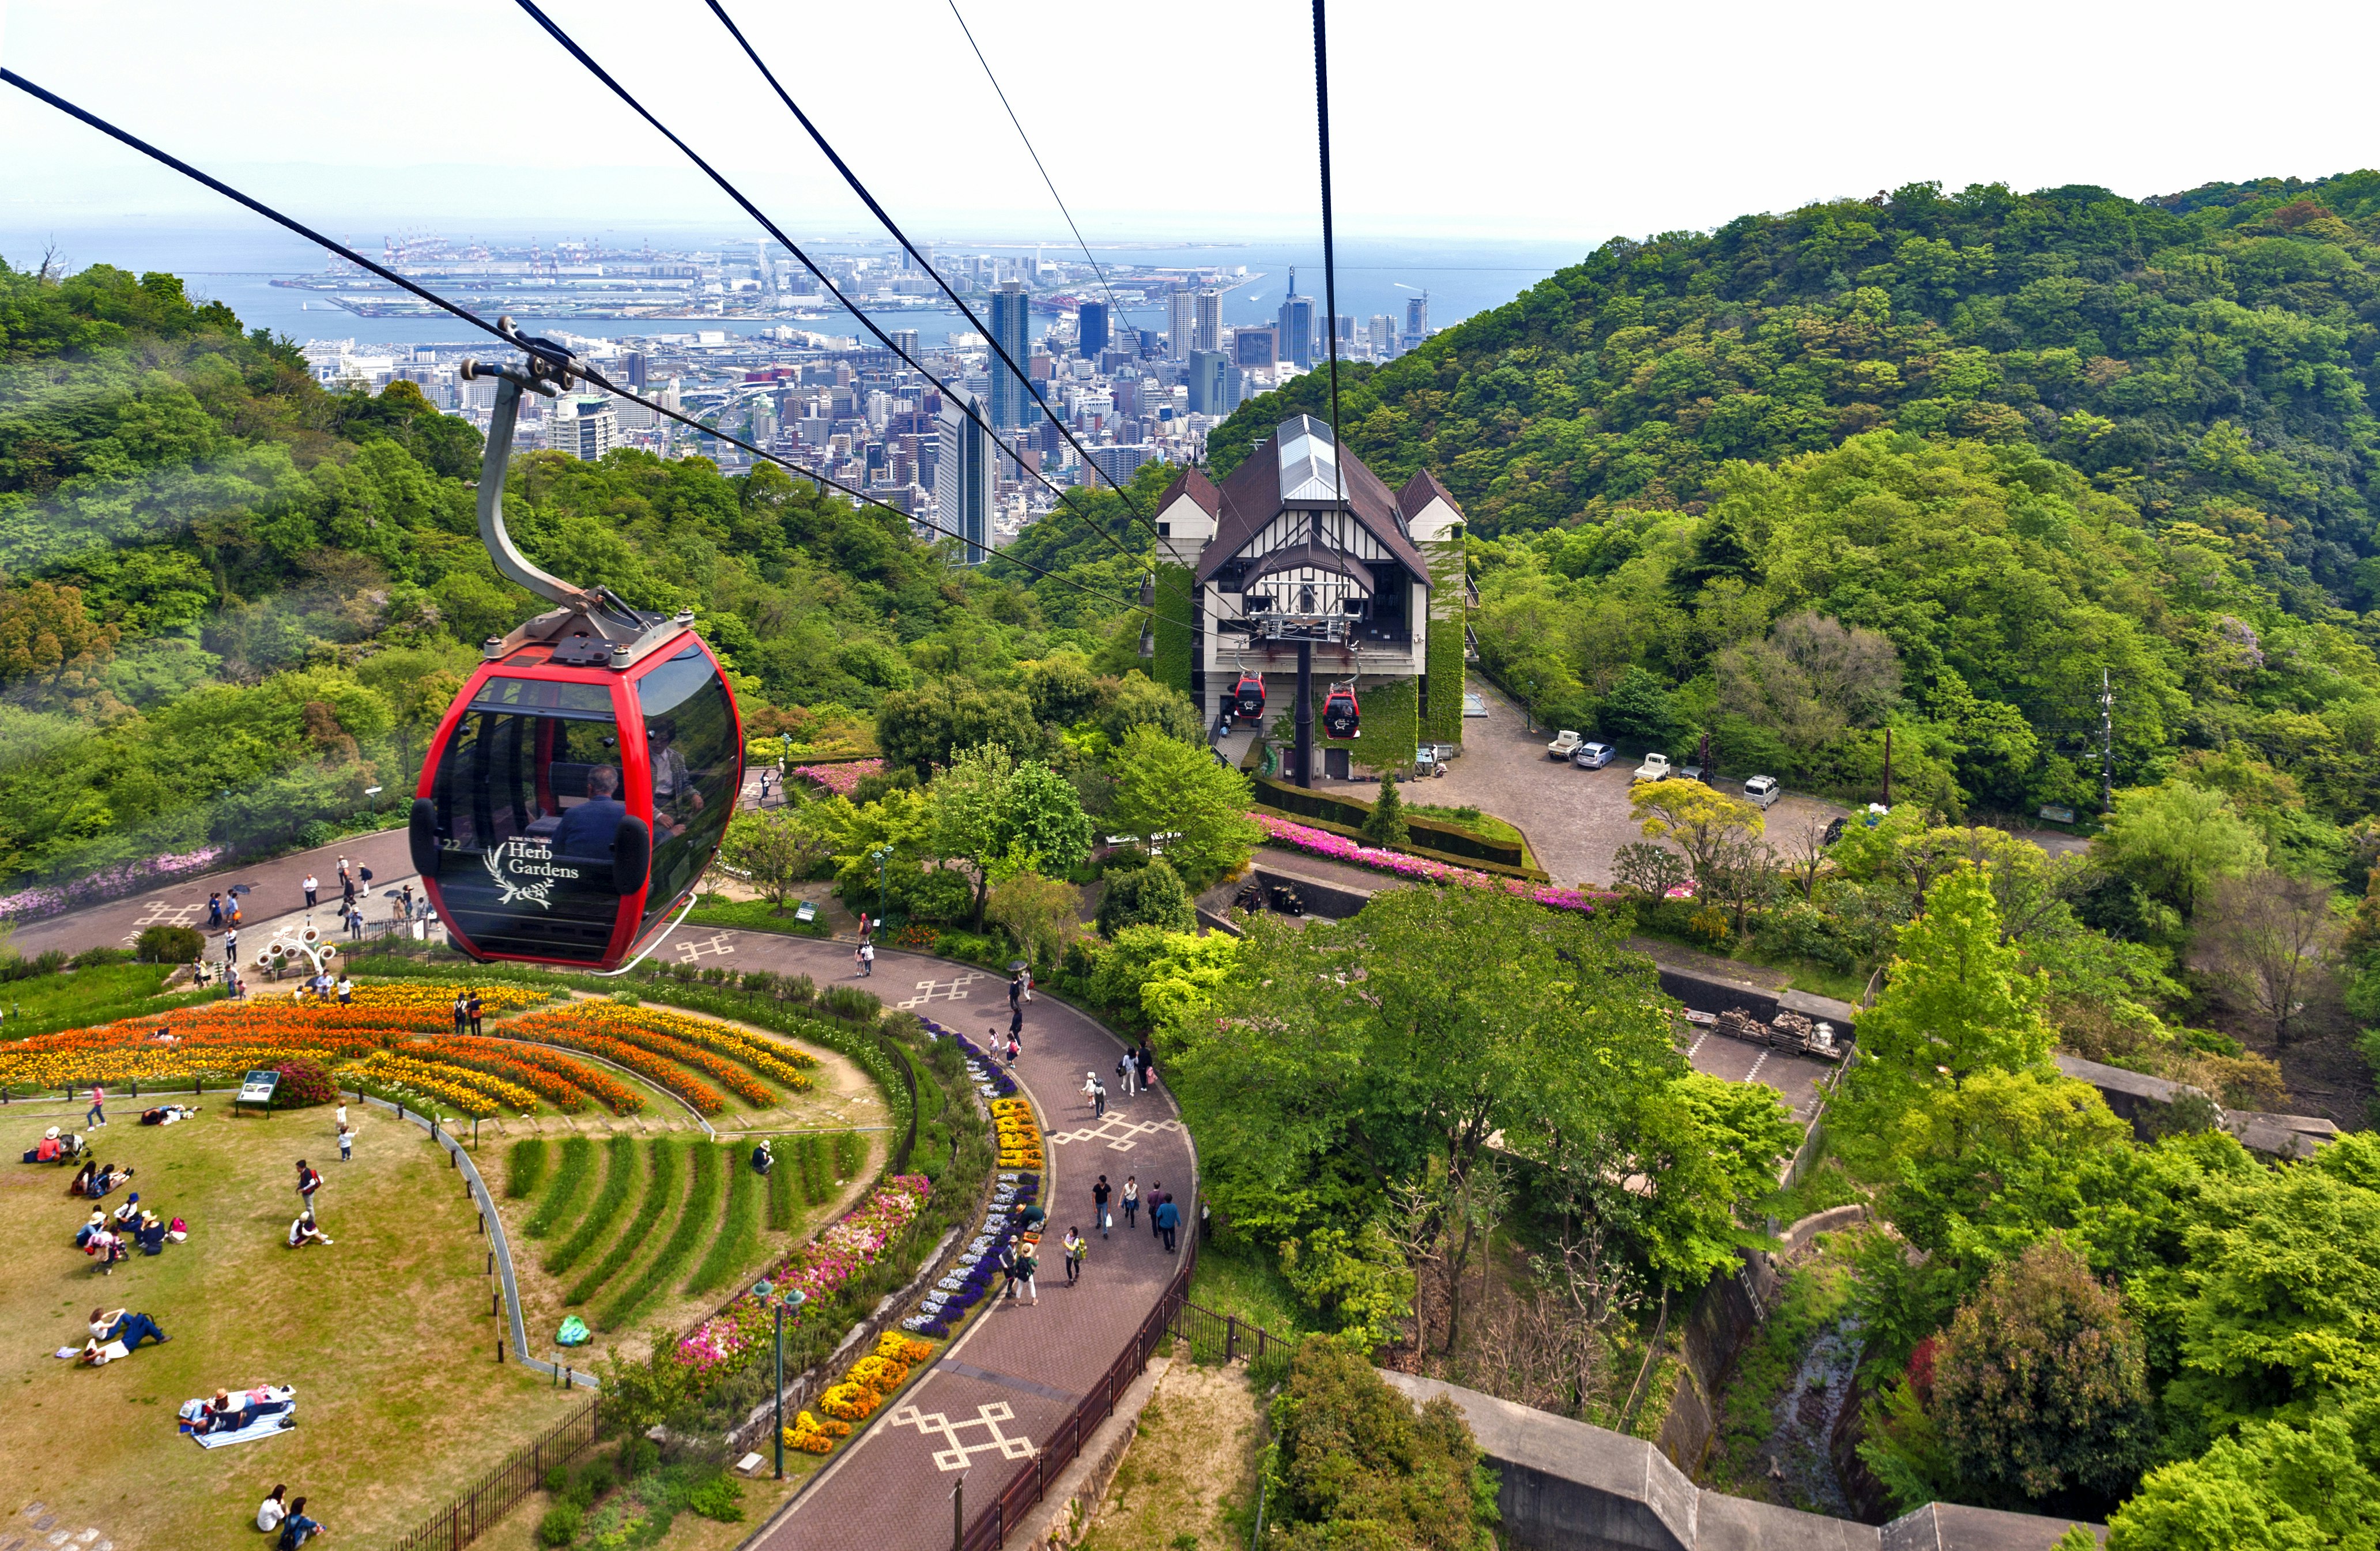 A red cable car carriage travels along a wire near the city of Kōbe. Below people sit beside a green manicured garden and in the background the city skyline is visible.